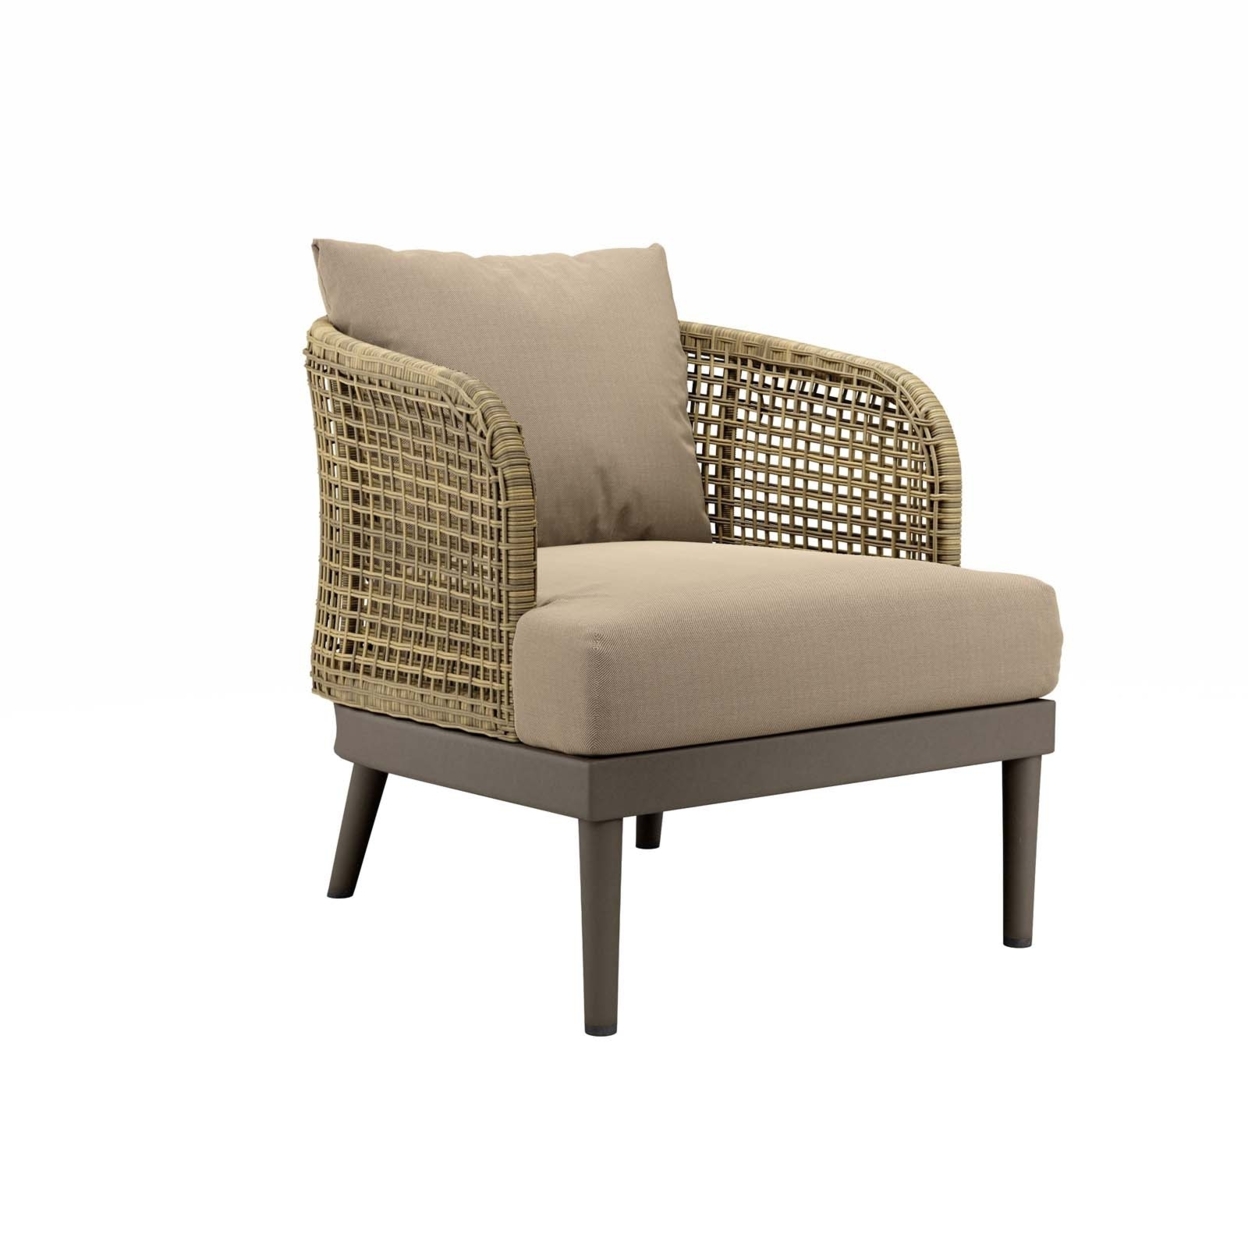 Meadow Outdoor Patio Armchair, Natural Taupe